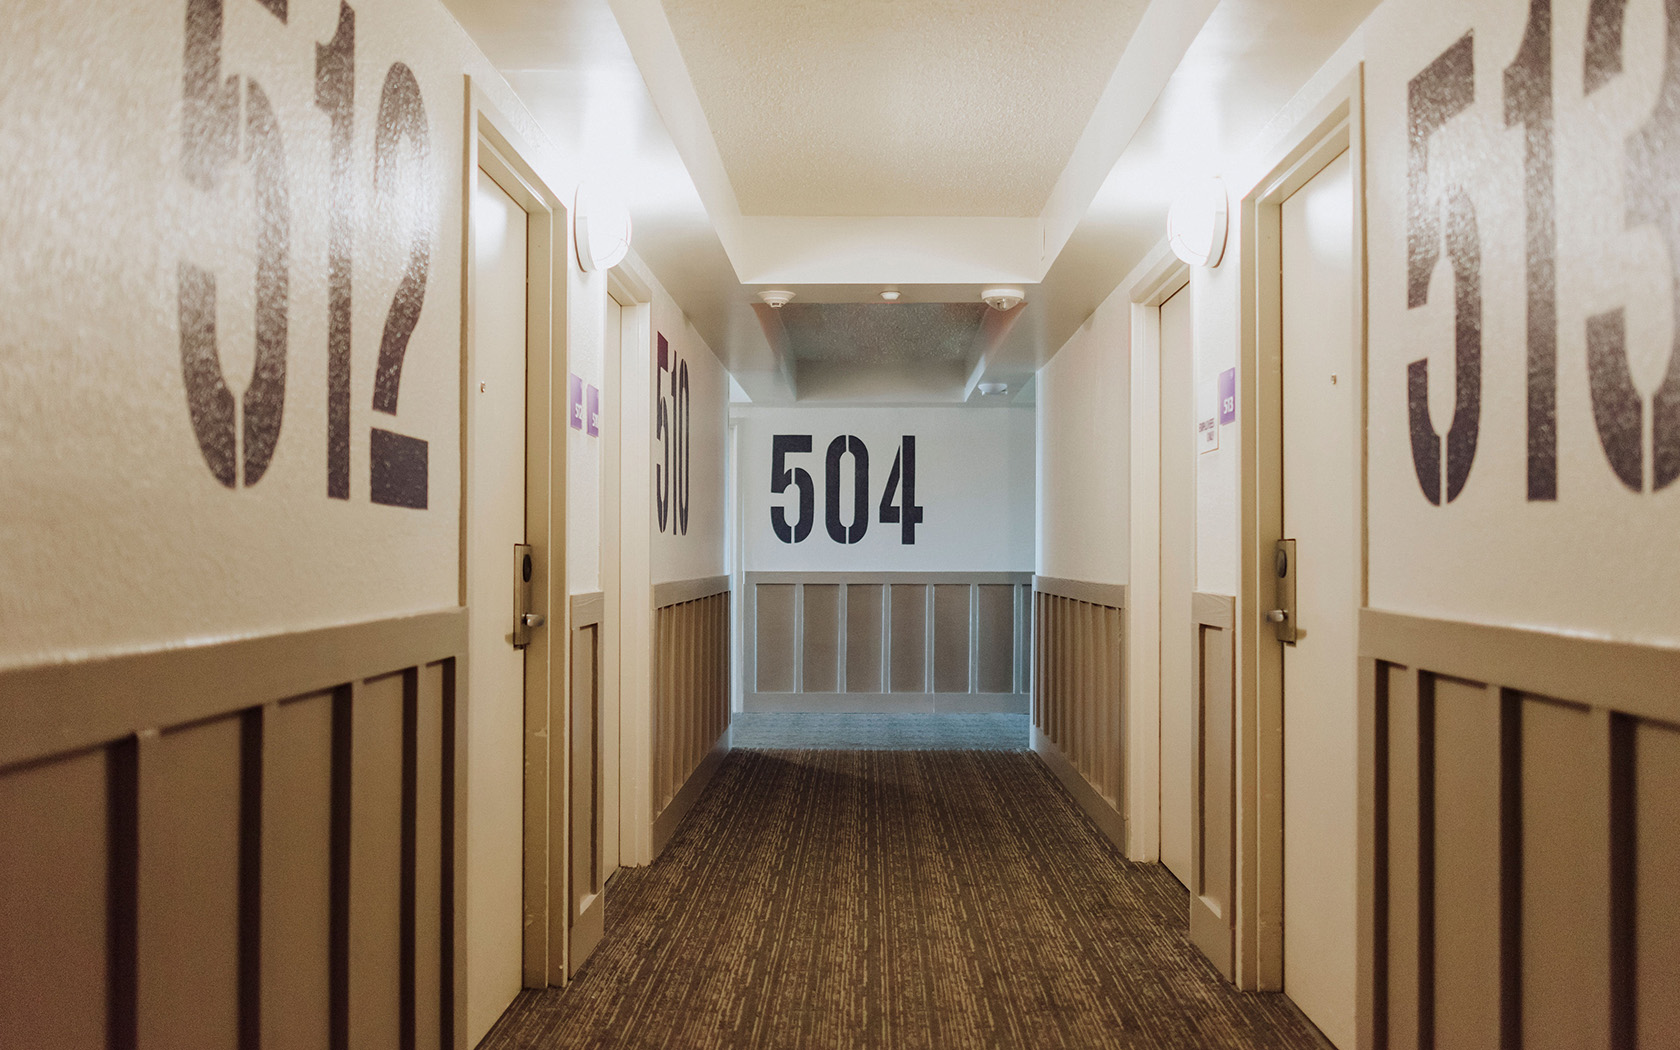 a hallway with numbers painted on the walls